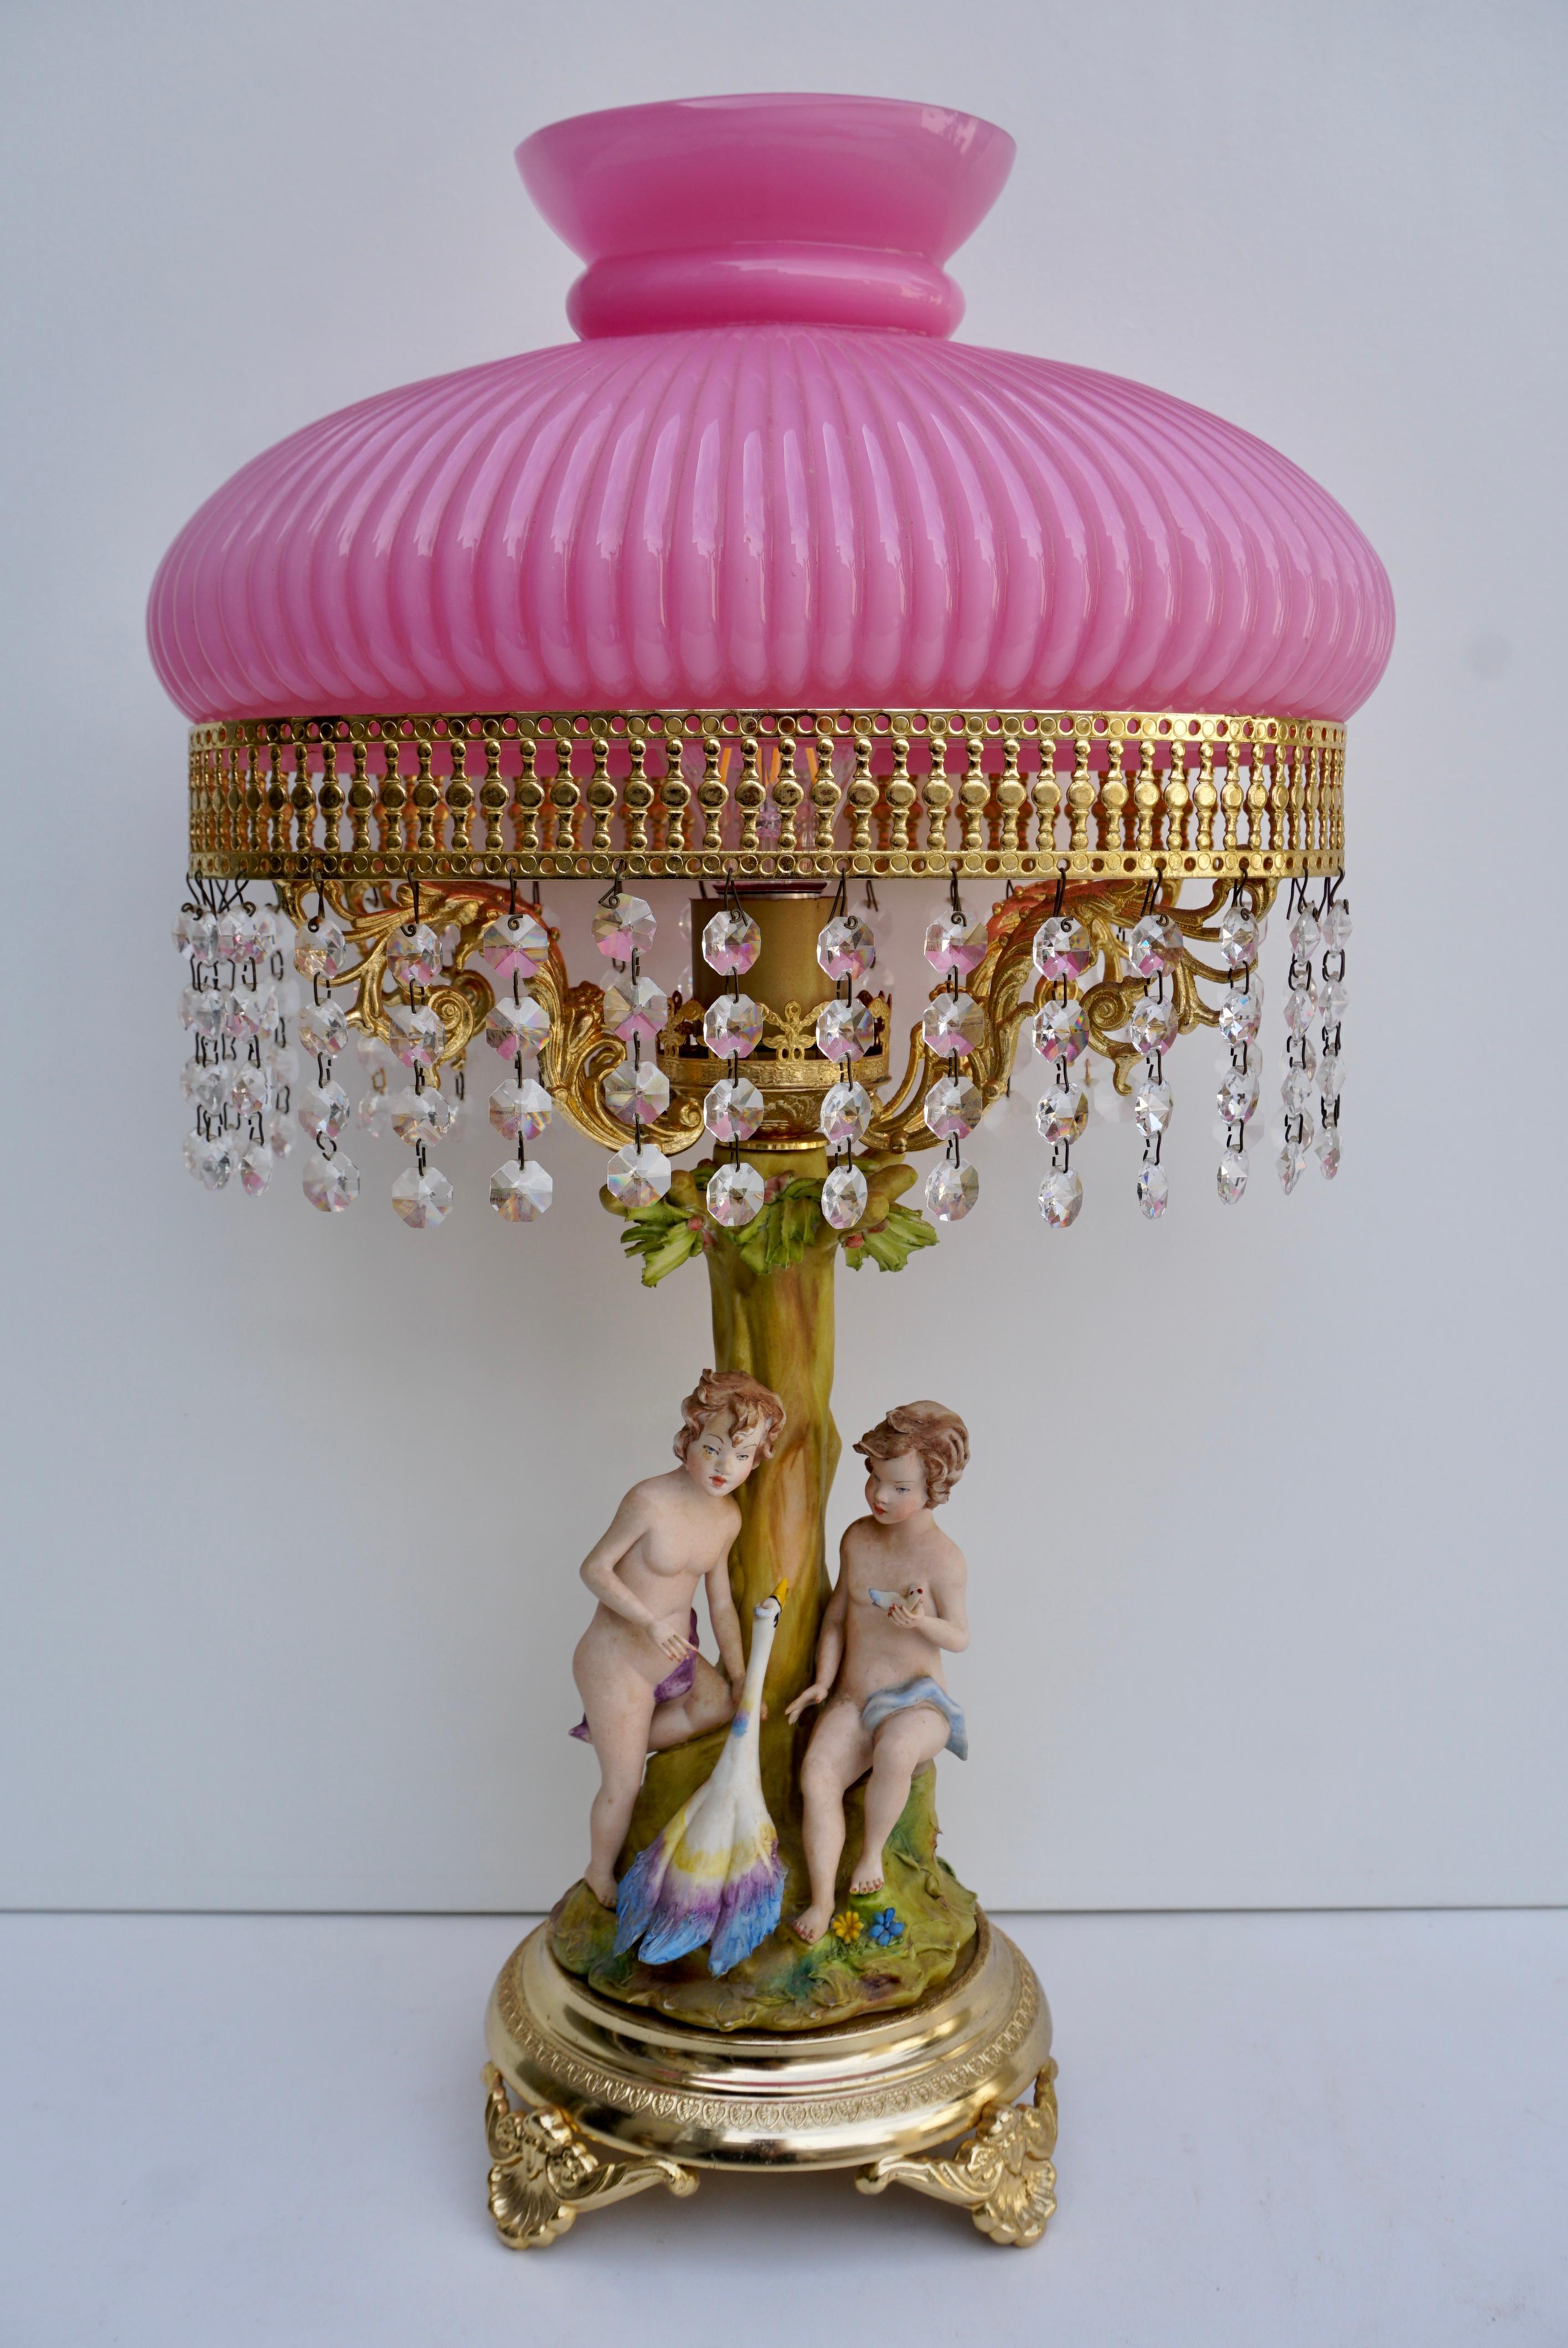 Italian table lamp in porcelain and glass.
Two children with a swan under a tree”. A porcelain statue mounted as a lamp with pink glass shade and crystal bells.